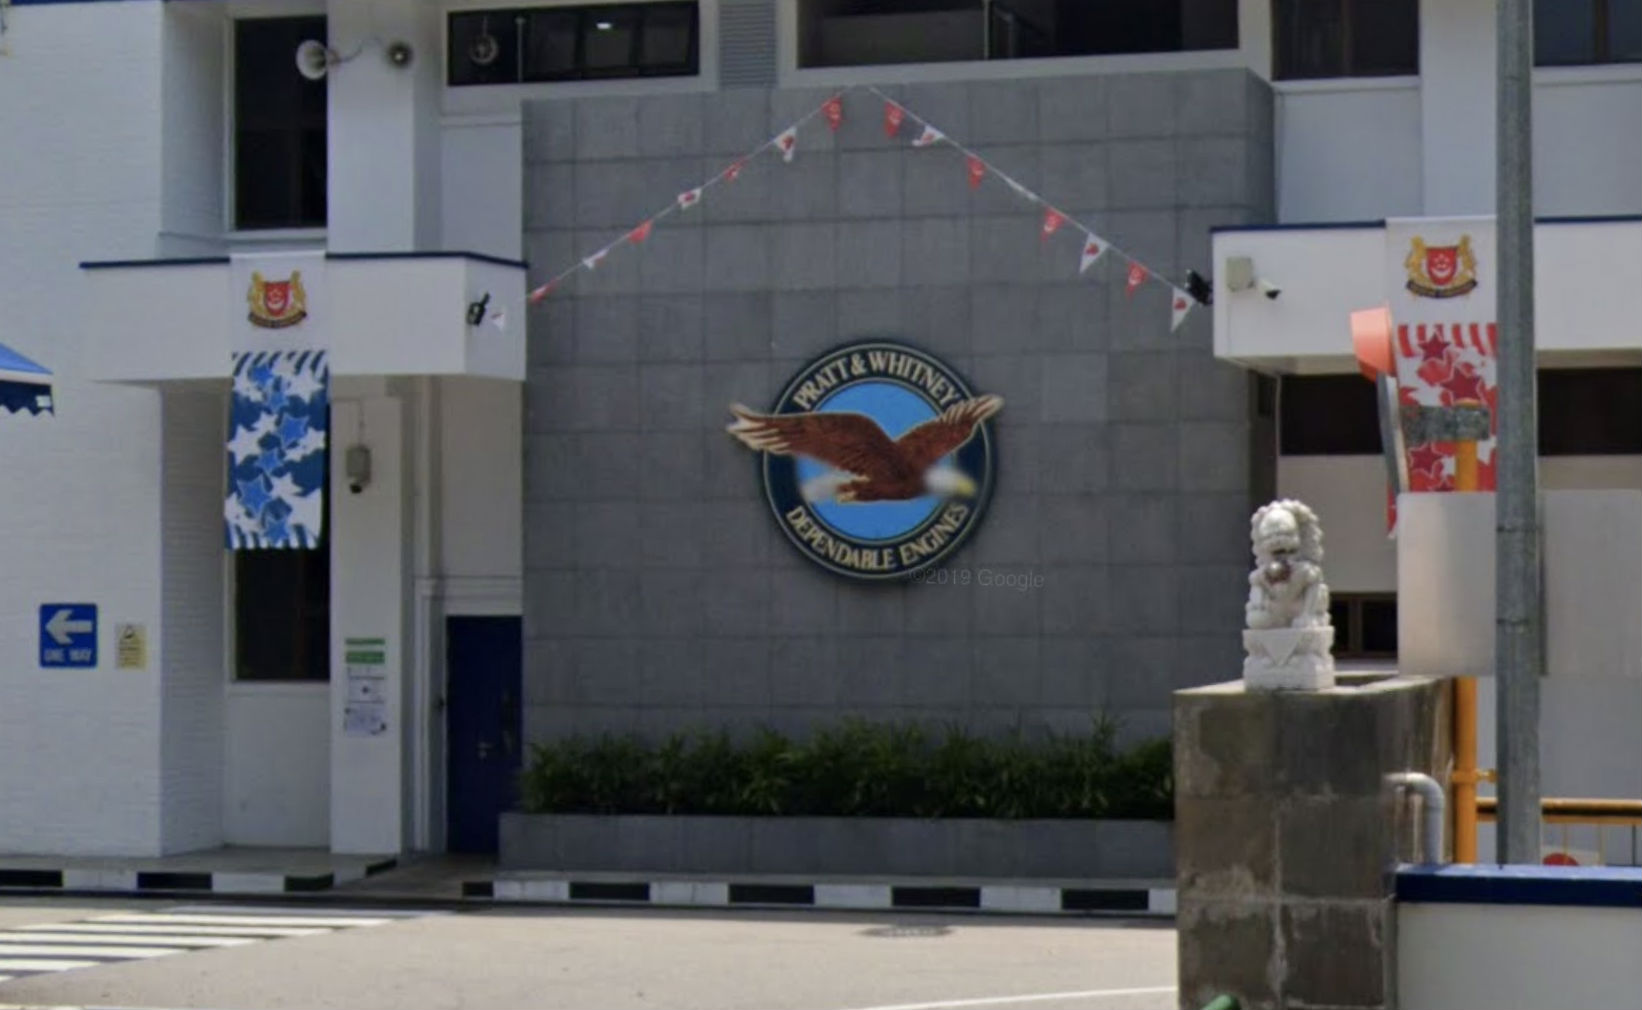 Pratt & Whitney’s emblem hangs outside the office of Eagle Services Asia in Singapore. Image: Google